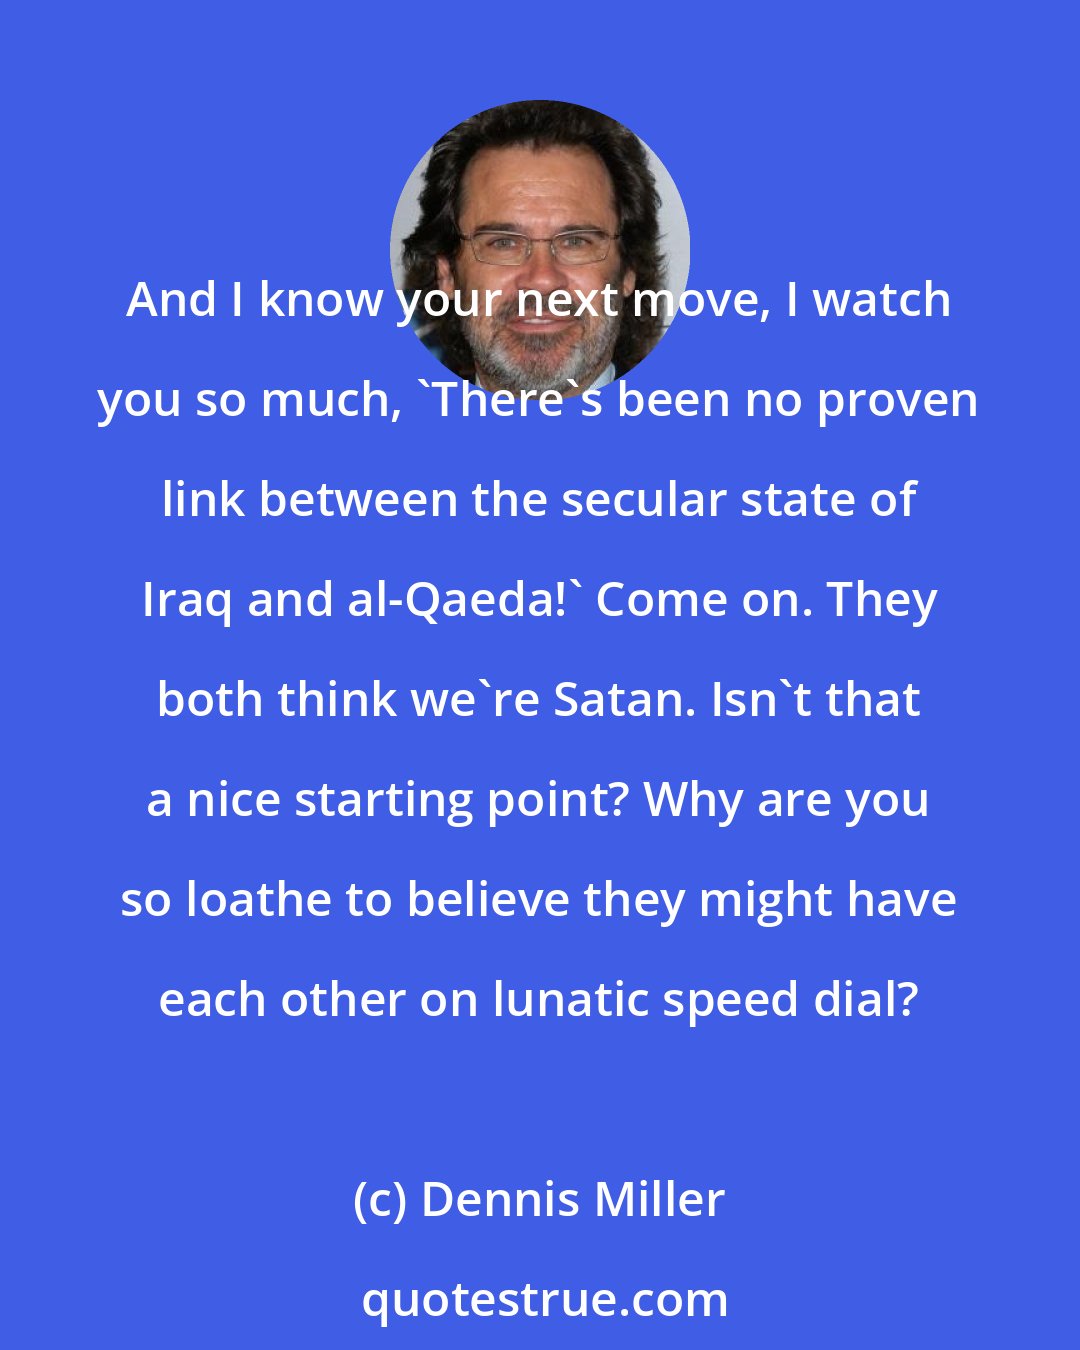 Dennis Miller: And I know your next move, I watch you so much, 'There's been no proven link between the secular state of Iraq and al-Qaeda!' Come on. They both think we're Satan. Isn't that a nice starting point? Why are you so loathe to believe they might have each other on lunatic speed dial?